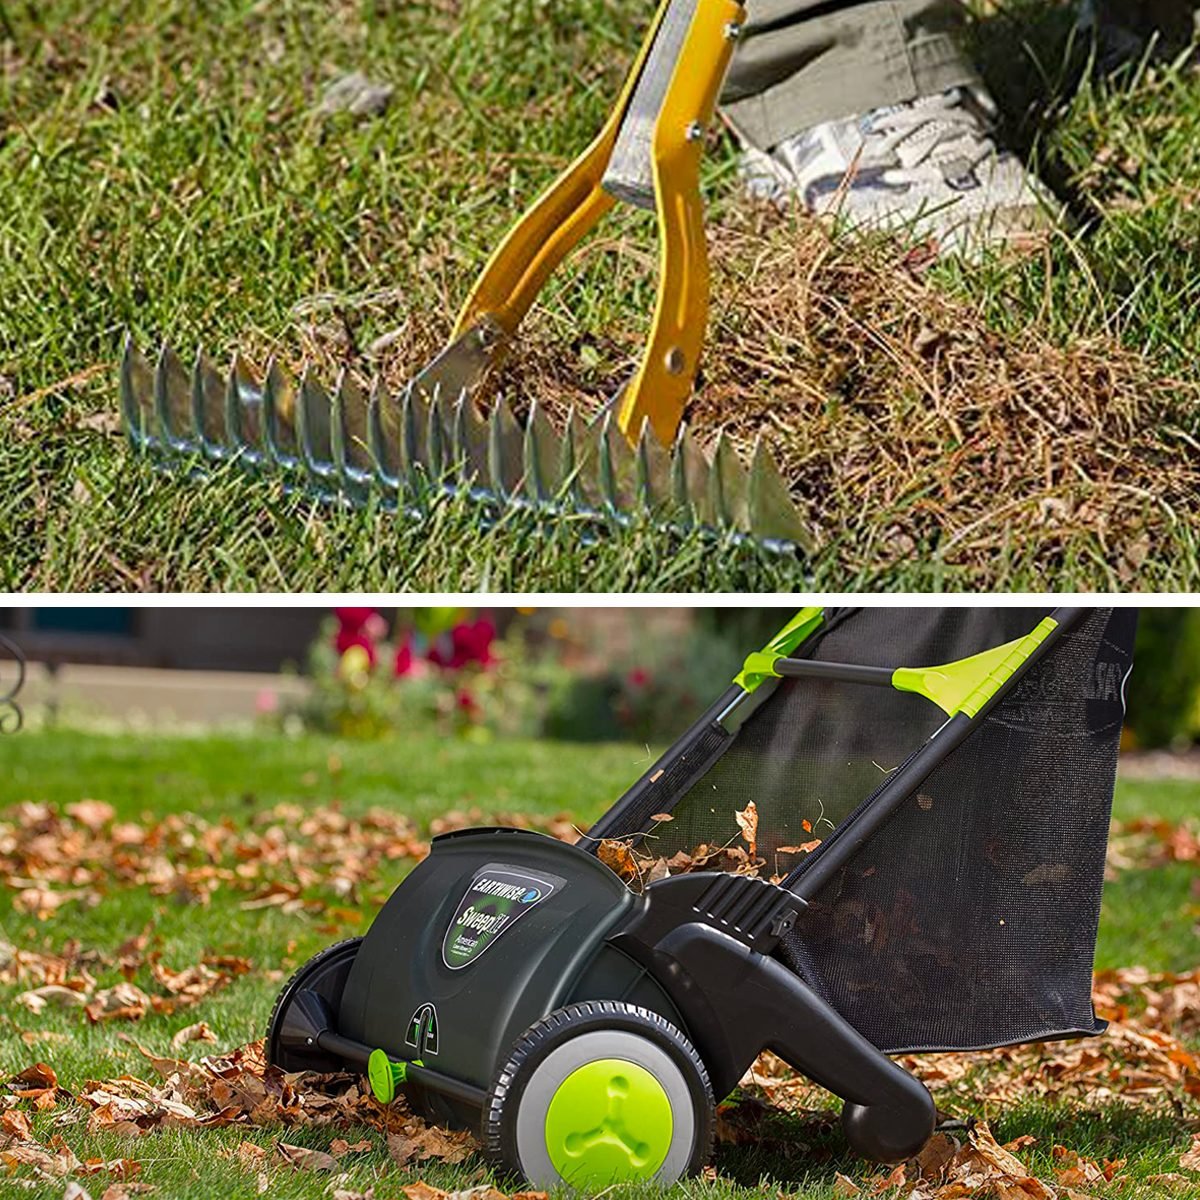 Dethatcher vs. Lawn Sweeper: What's the Difference?